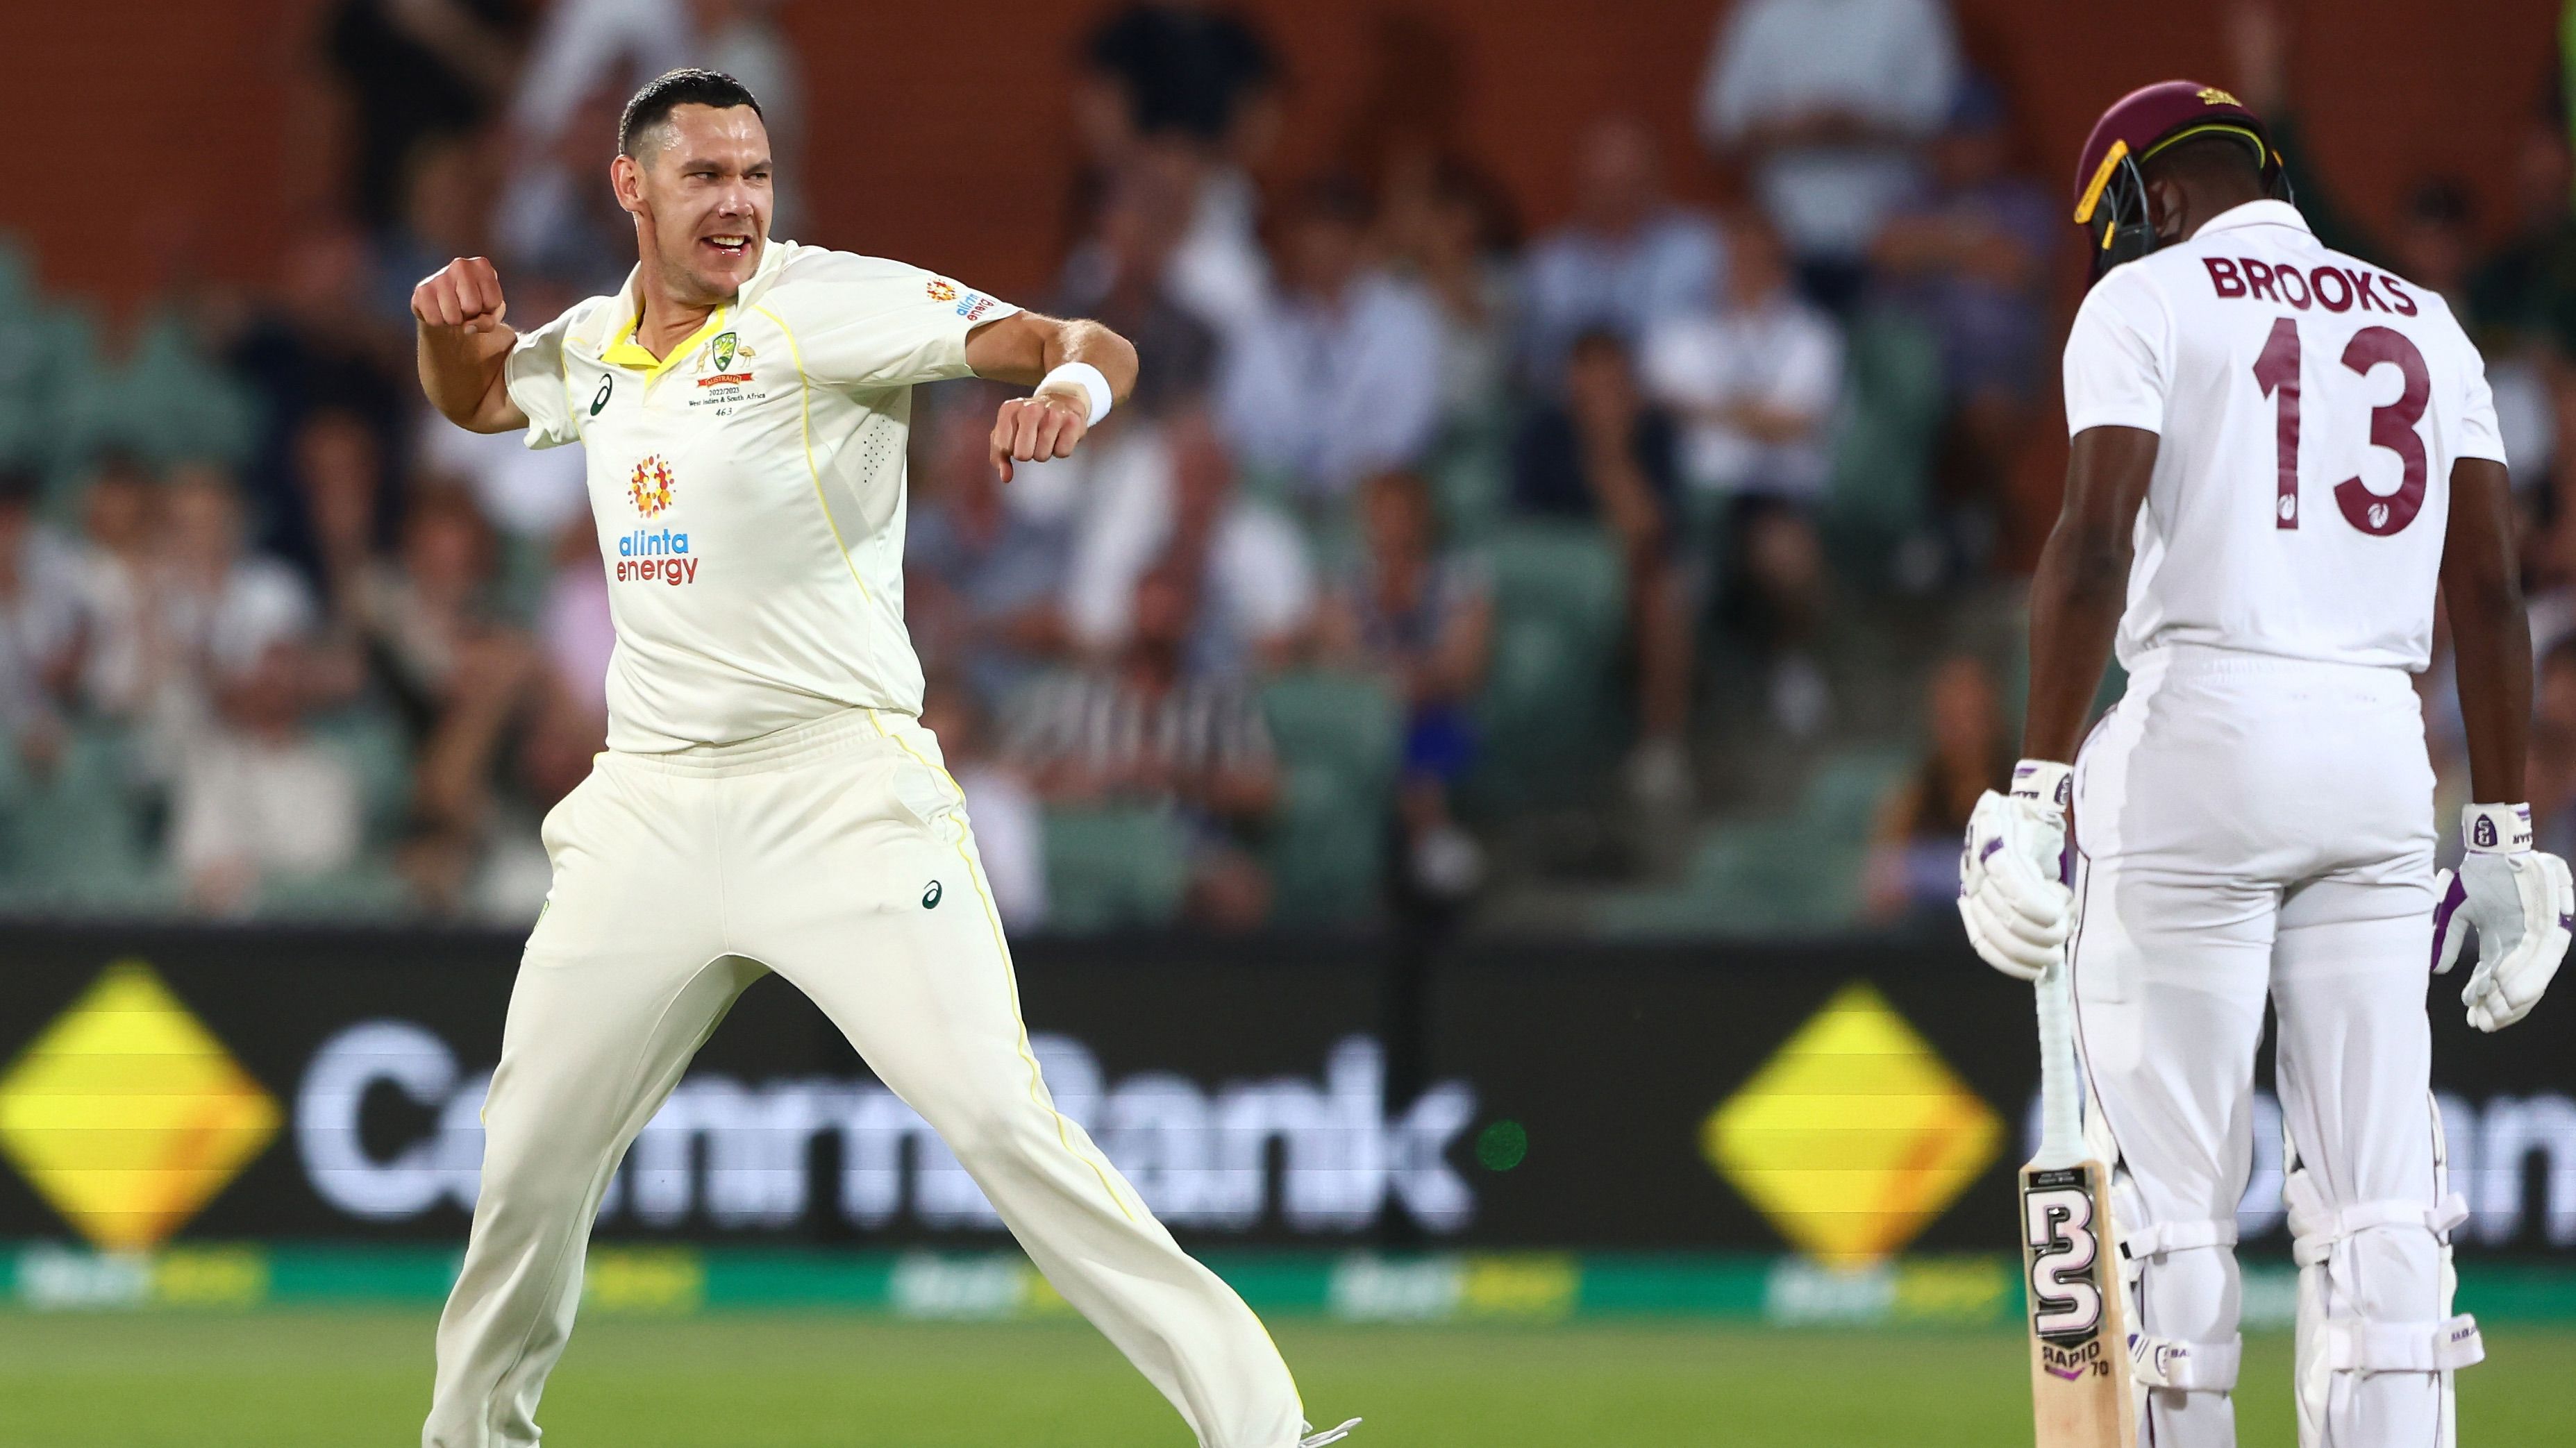 Scott Boland of Australia celebrates the wicket of Shamarh Brooks of West Indies during day three of the Second Test Match in the series between Australia and the West Indies at Adelaide Oval on December 10, 2022 in Adelaide, Australia. (Photo by Chris Hyde/Getty Images)